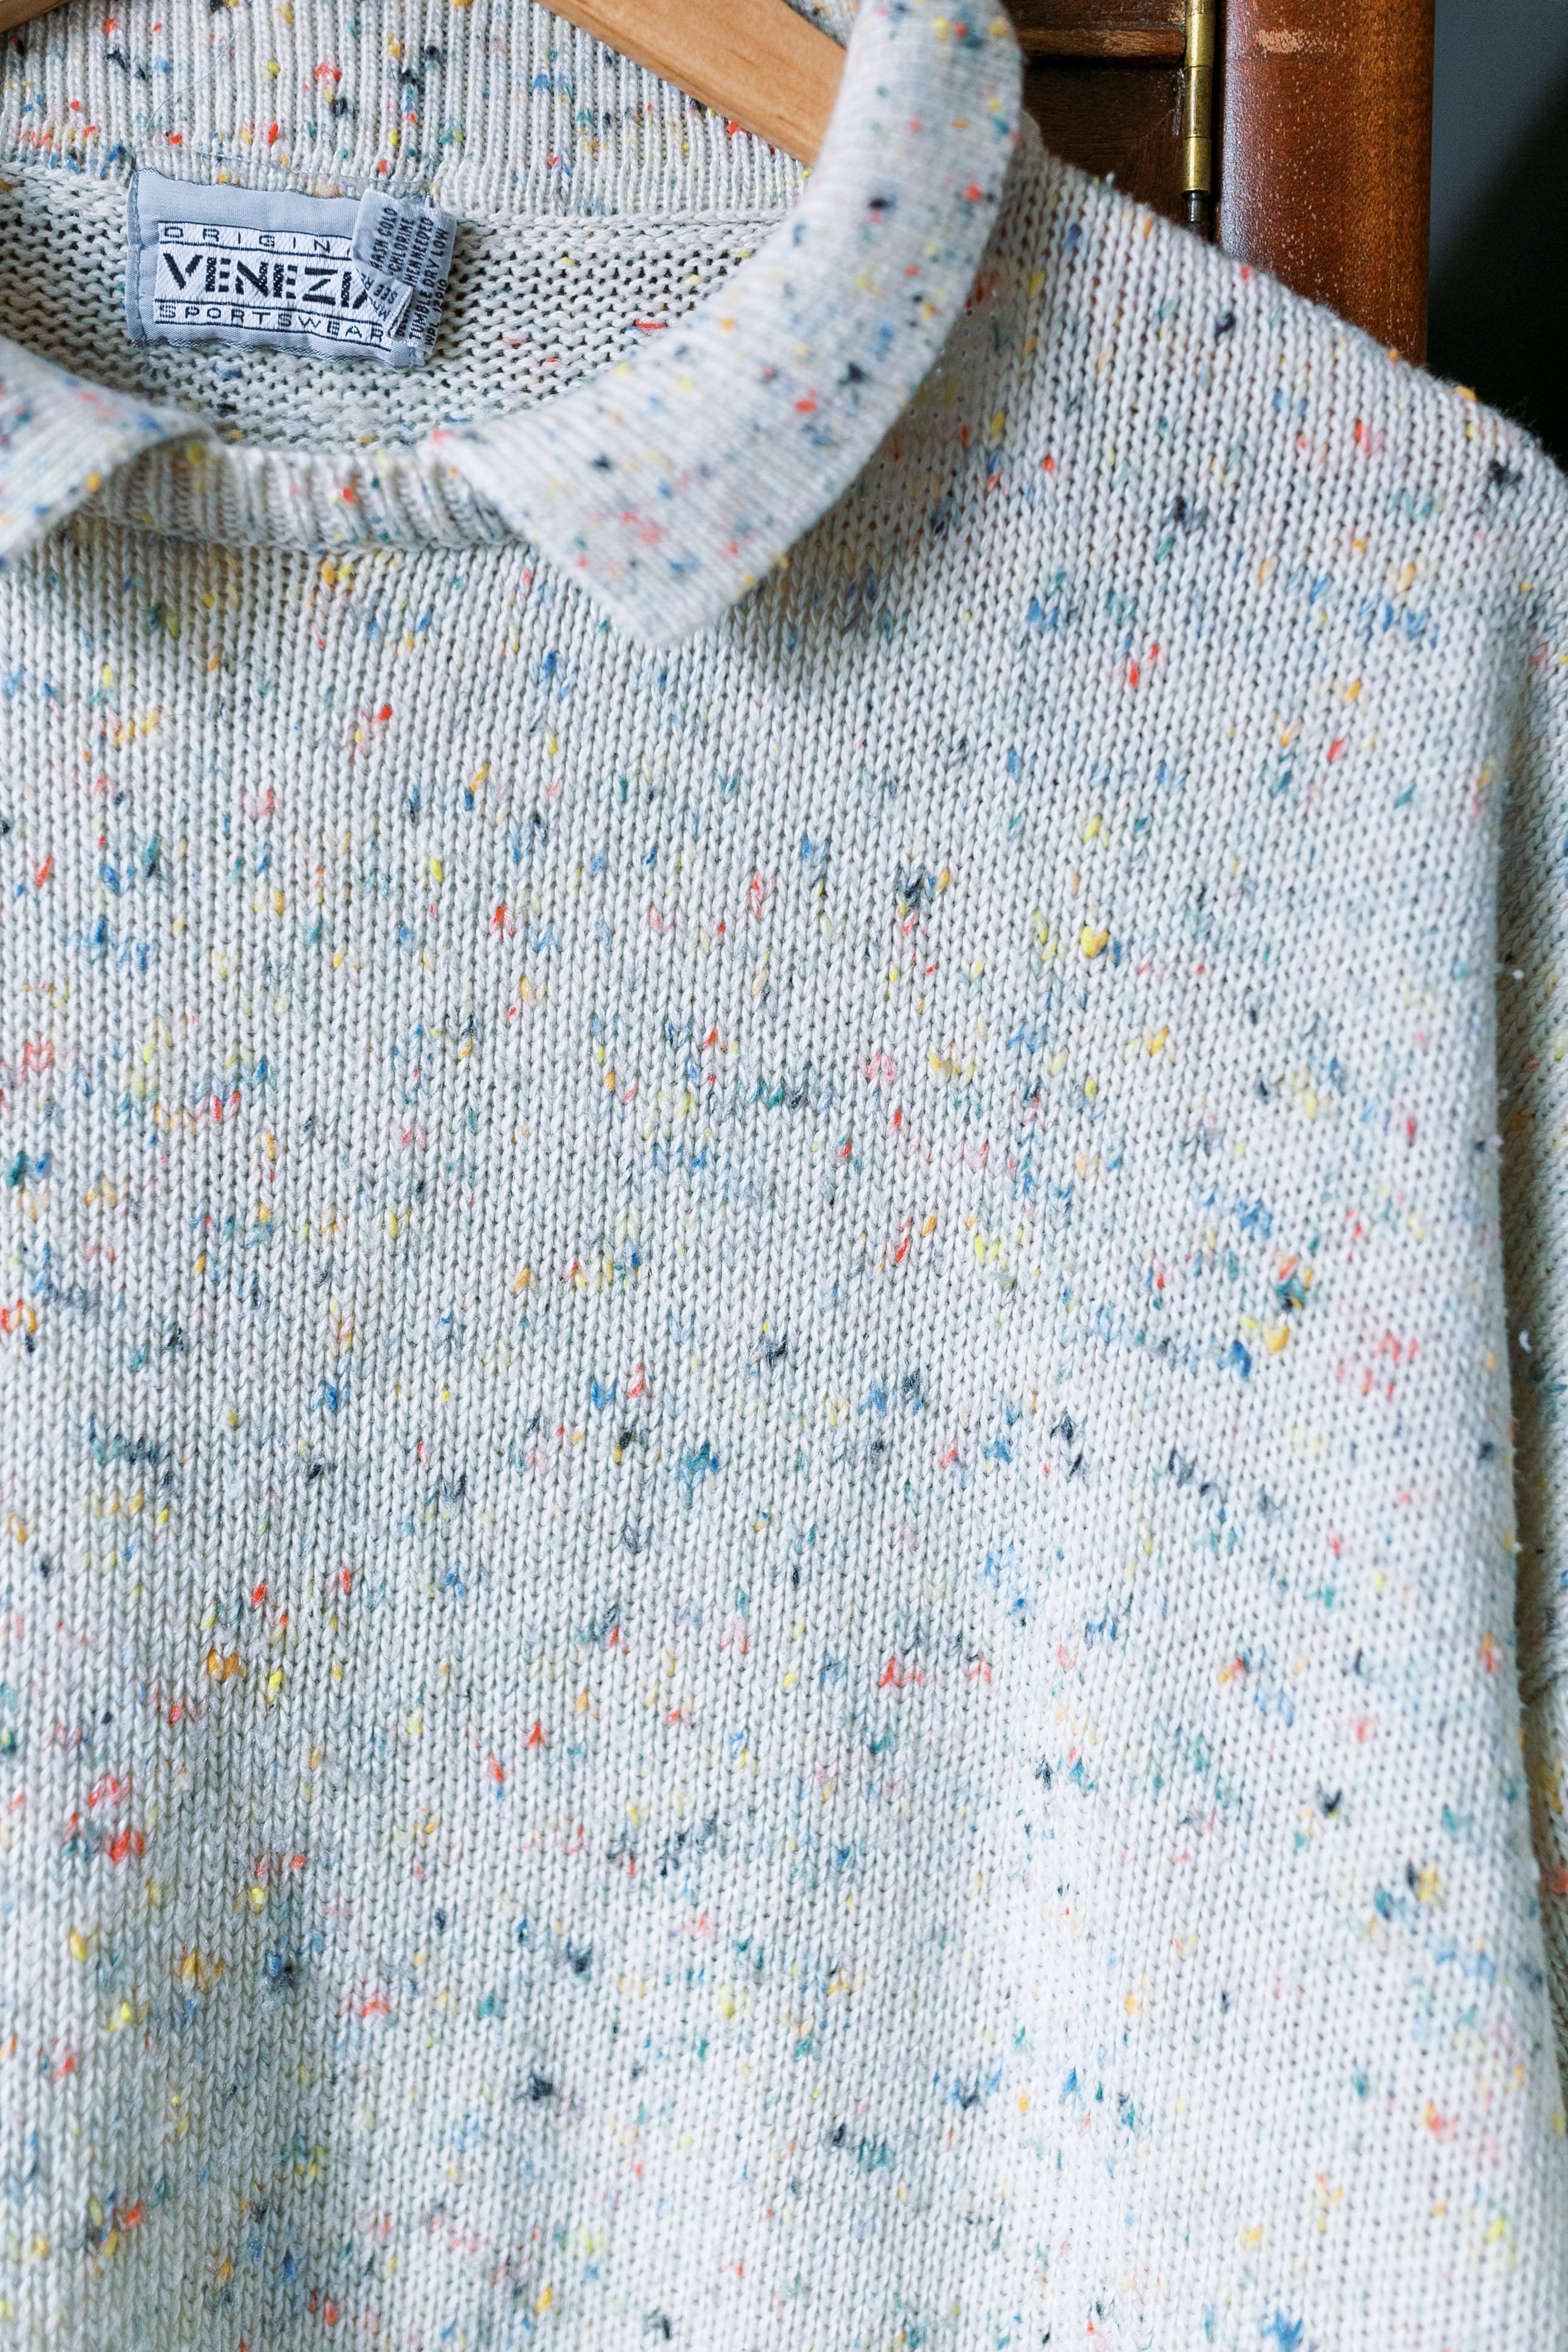 80s Rainbow Speckled Knit Sweater